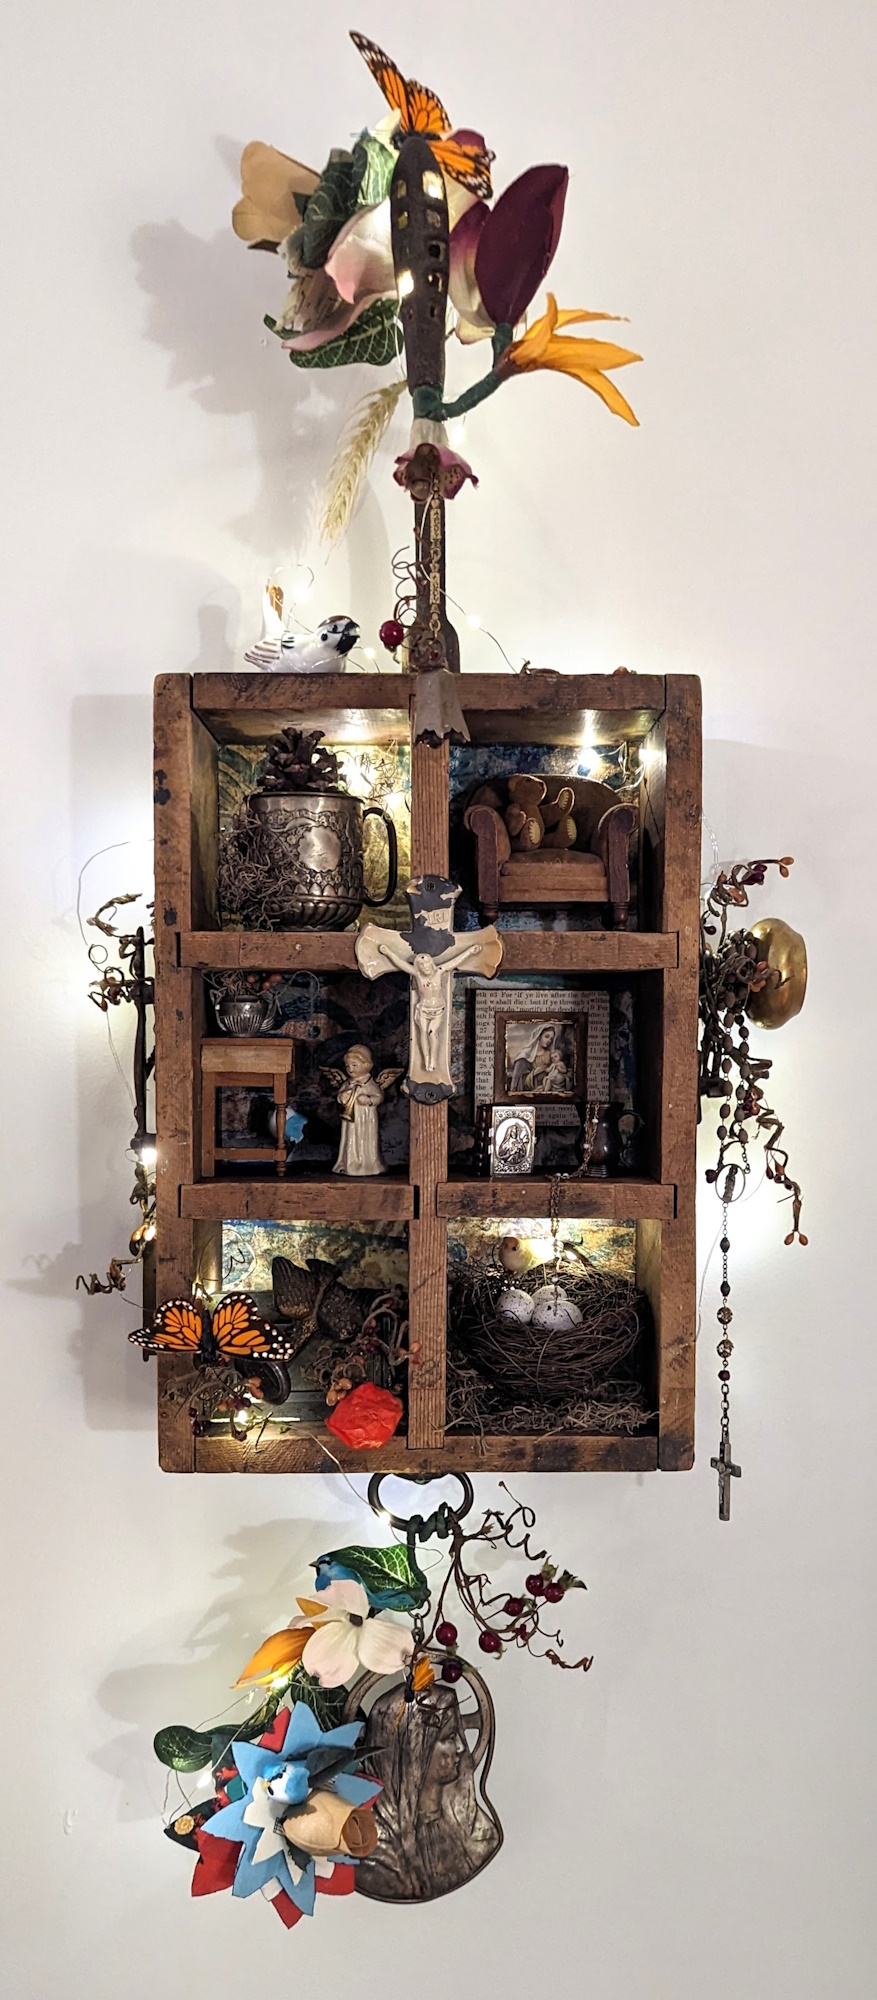 An assemblage sculpture titled 'Story Box', featuring intricate miniatures and spiritual objects, creatively arranged for exploring fantastical realms.